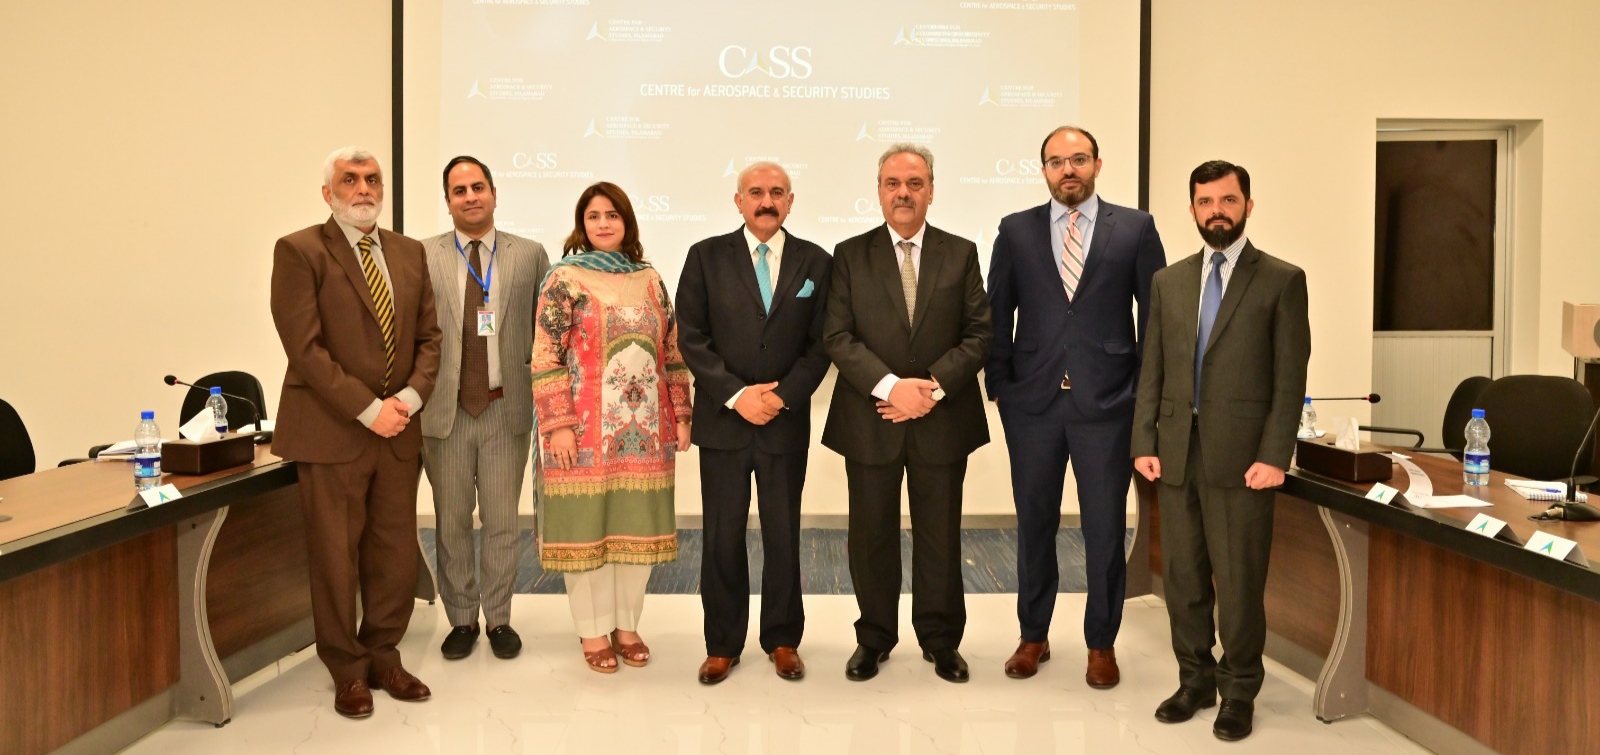 Need for a consistent policy to manage the bilateral relationship with Afghanistan’, urge speakers at CASS Roundtable.